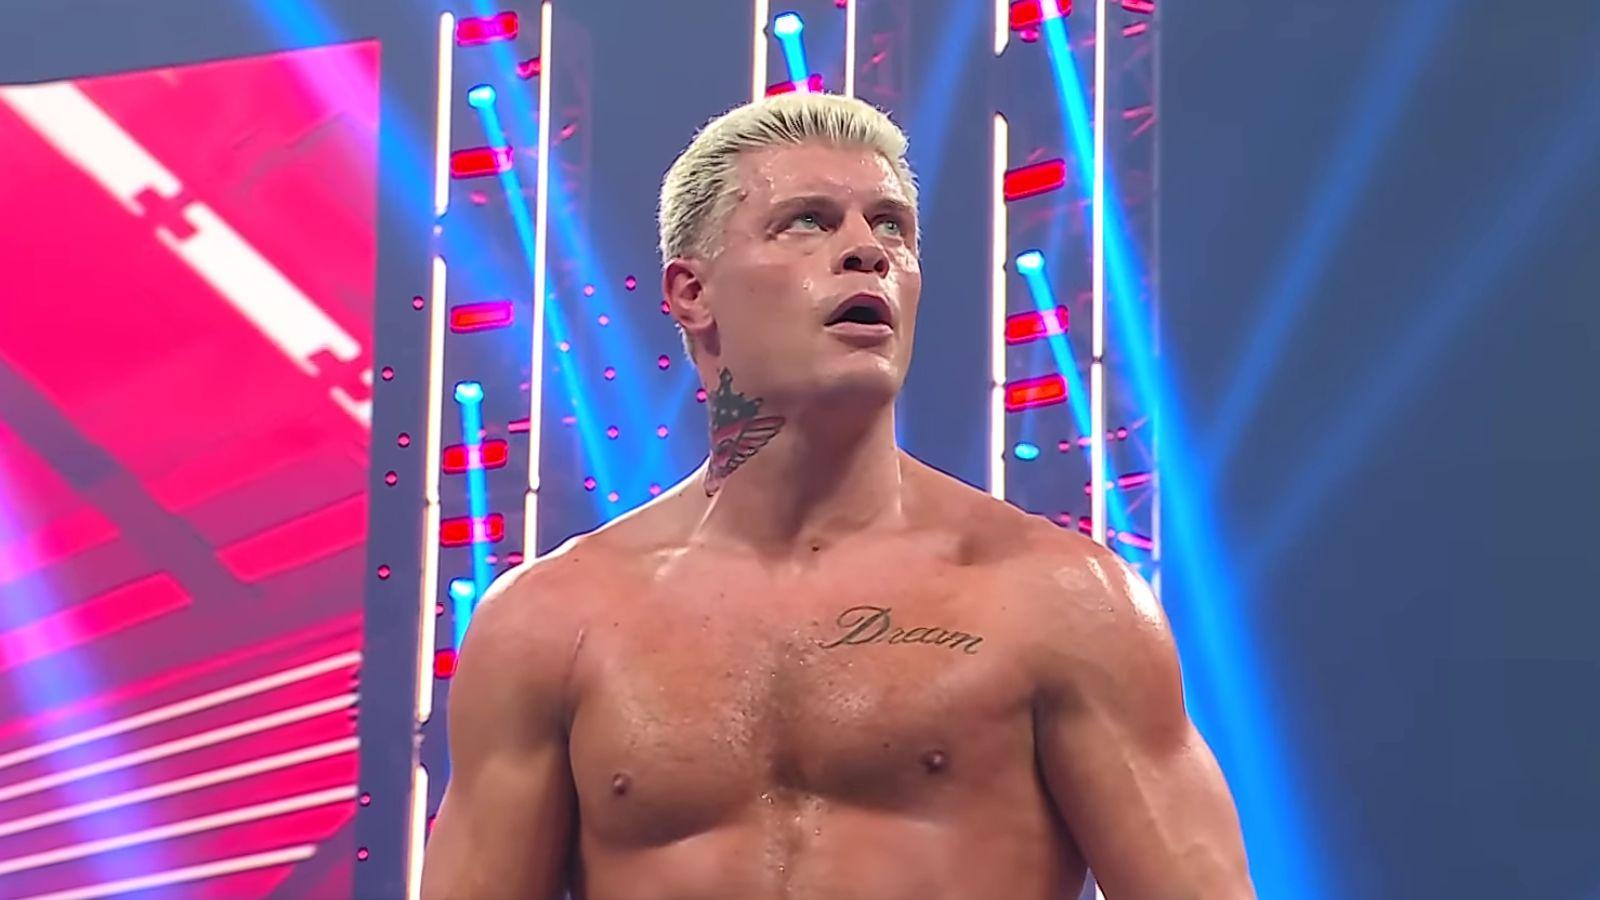 Cody Rhodes as a member of the WWE.